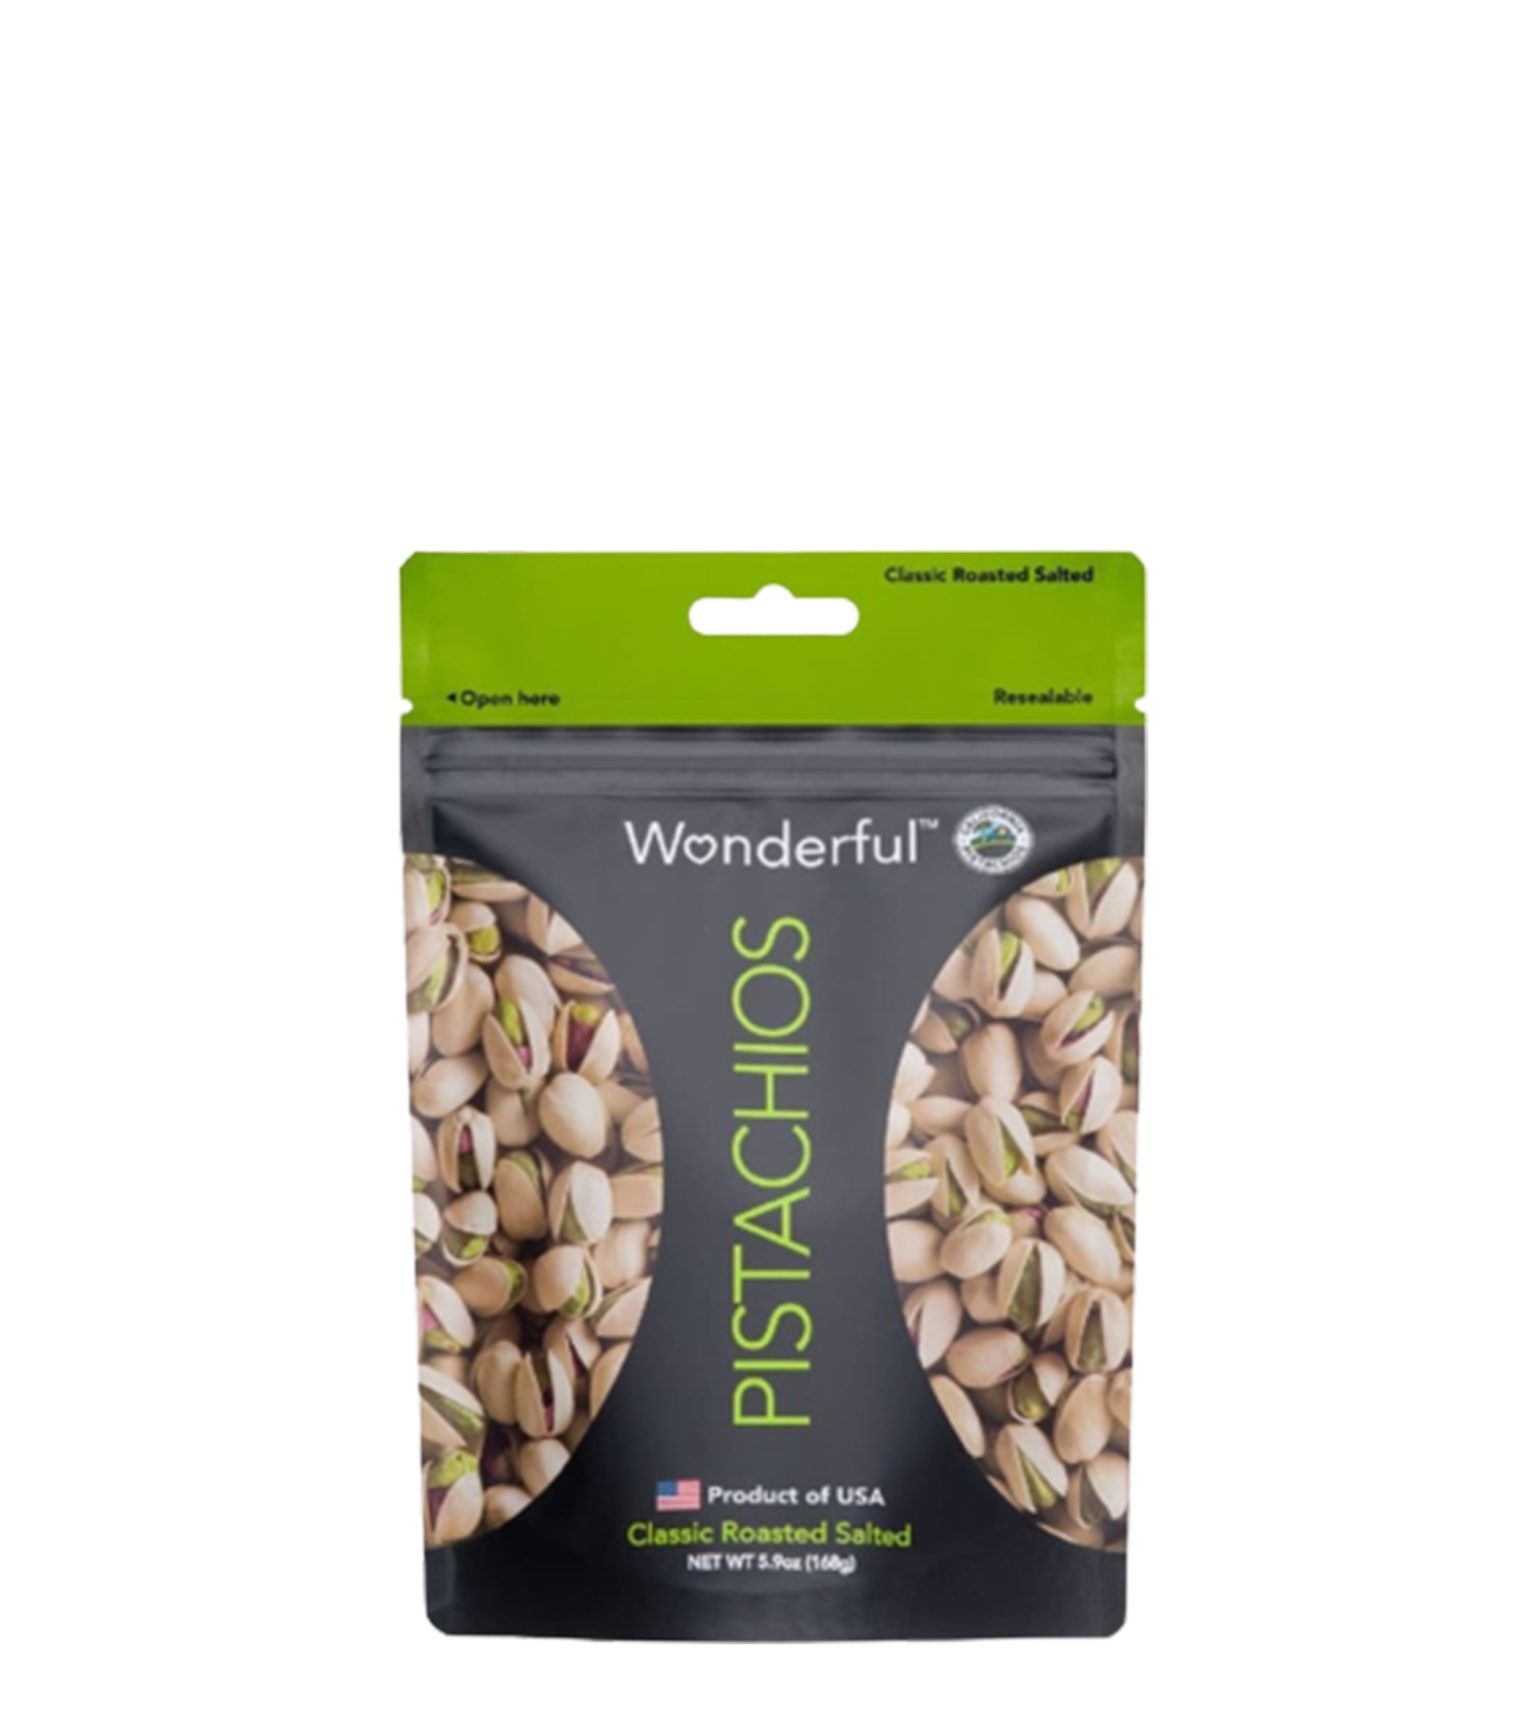 Wonderful Classic Roasted Salted Pistachios 168g-image